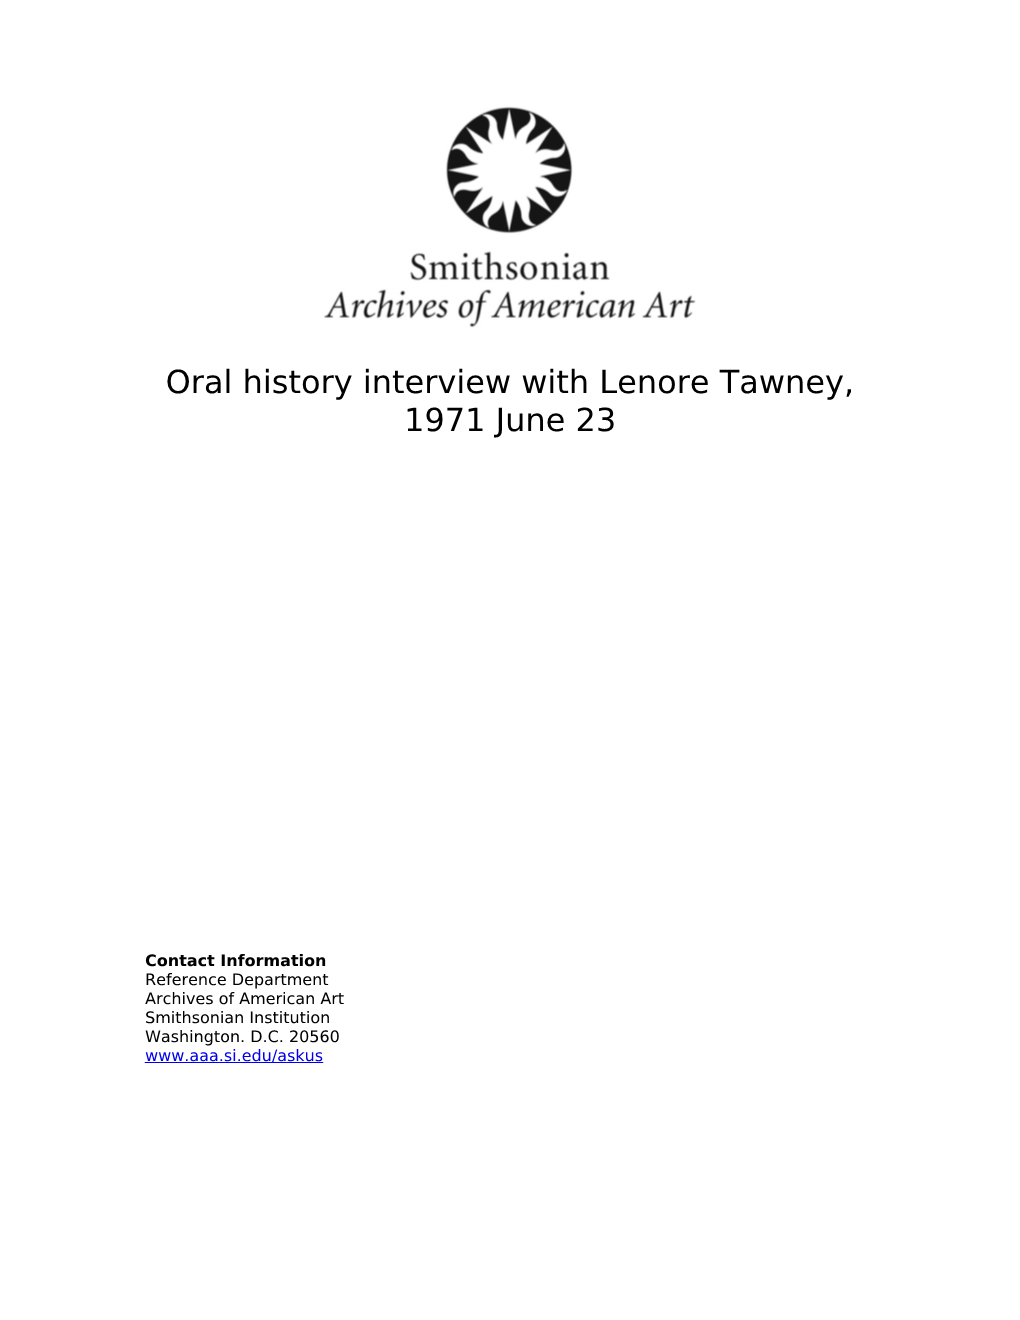 Oral History Interview with Lenore Tawney, 1971 June 23